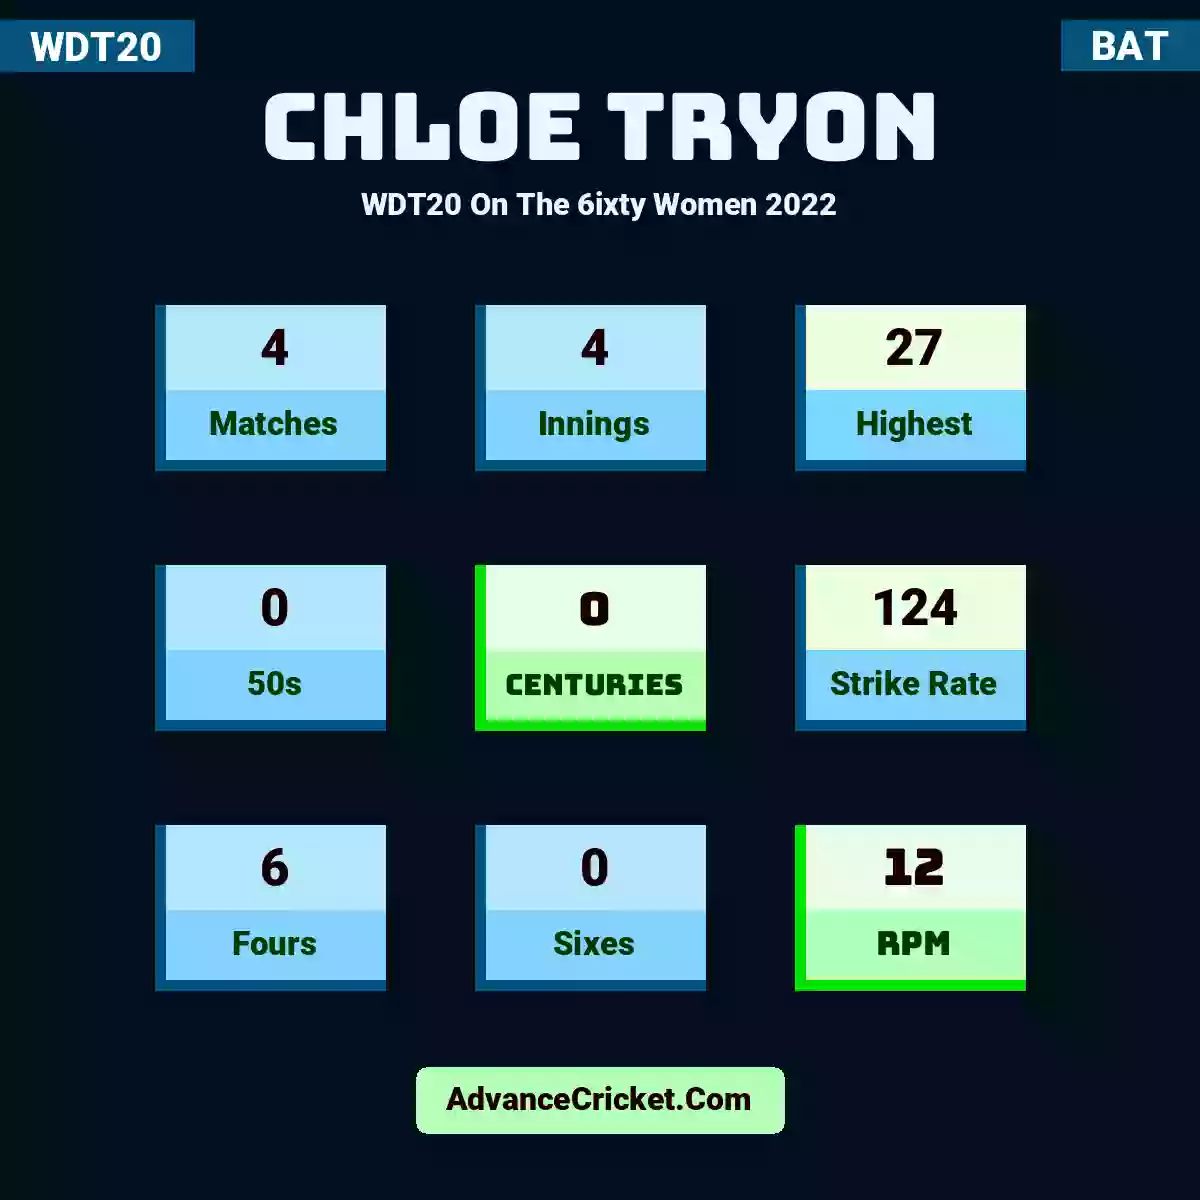 Chloe Tryon WDT20  On The 6ixty Women 2022, Chloe Tryon played 4 matches, scored 27 runs as highest, 0 half-centuries, and 0 centuries, with a strike rate of 124. C.Tryon hit 6 fours and 0 sixes, with an RPM of 12.